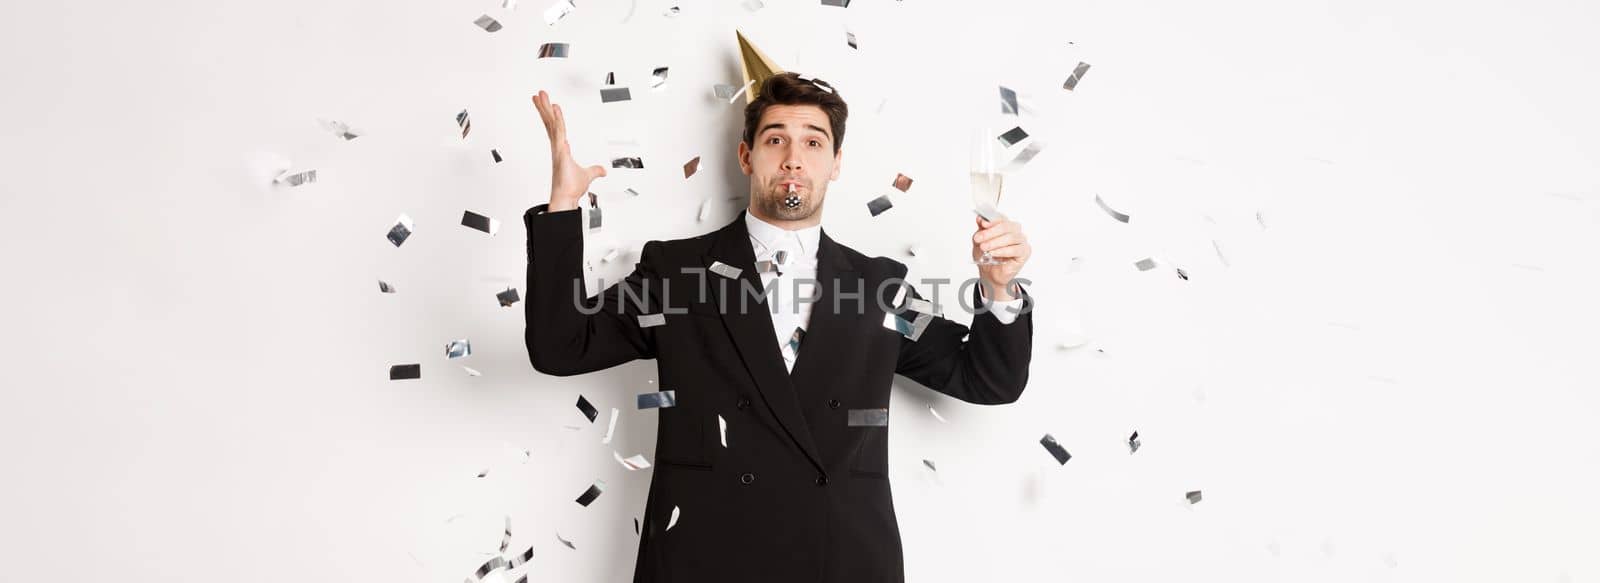 Handsome party guy in black suit having fun, celebrating new year, blowing whistle and drinking champagne while confetti falling, wishing happy holidays, standing against white background.